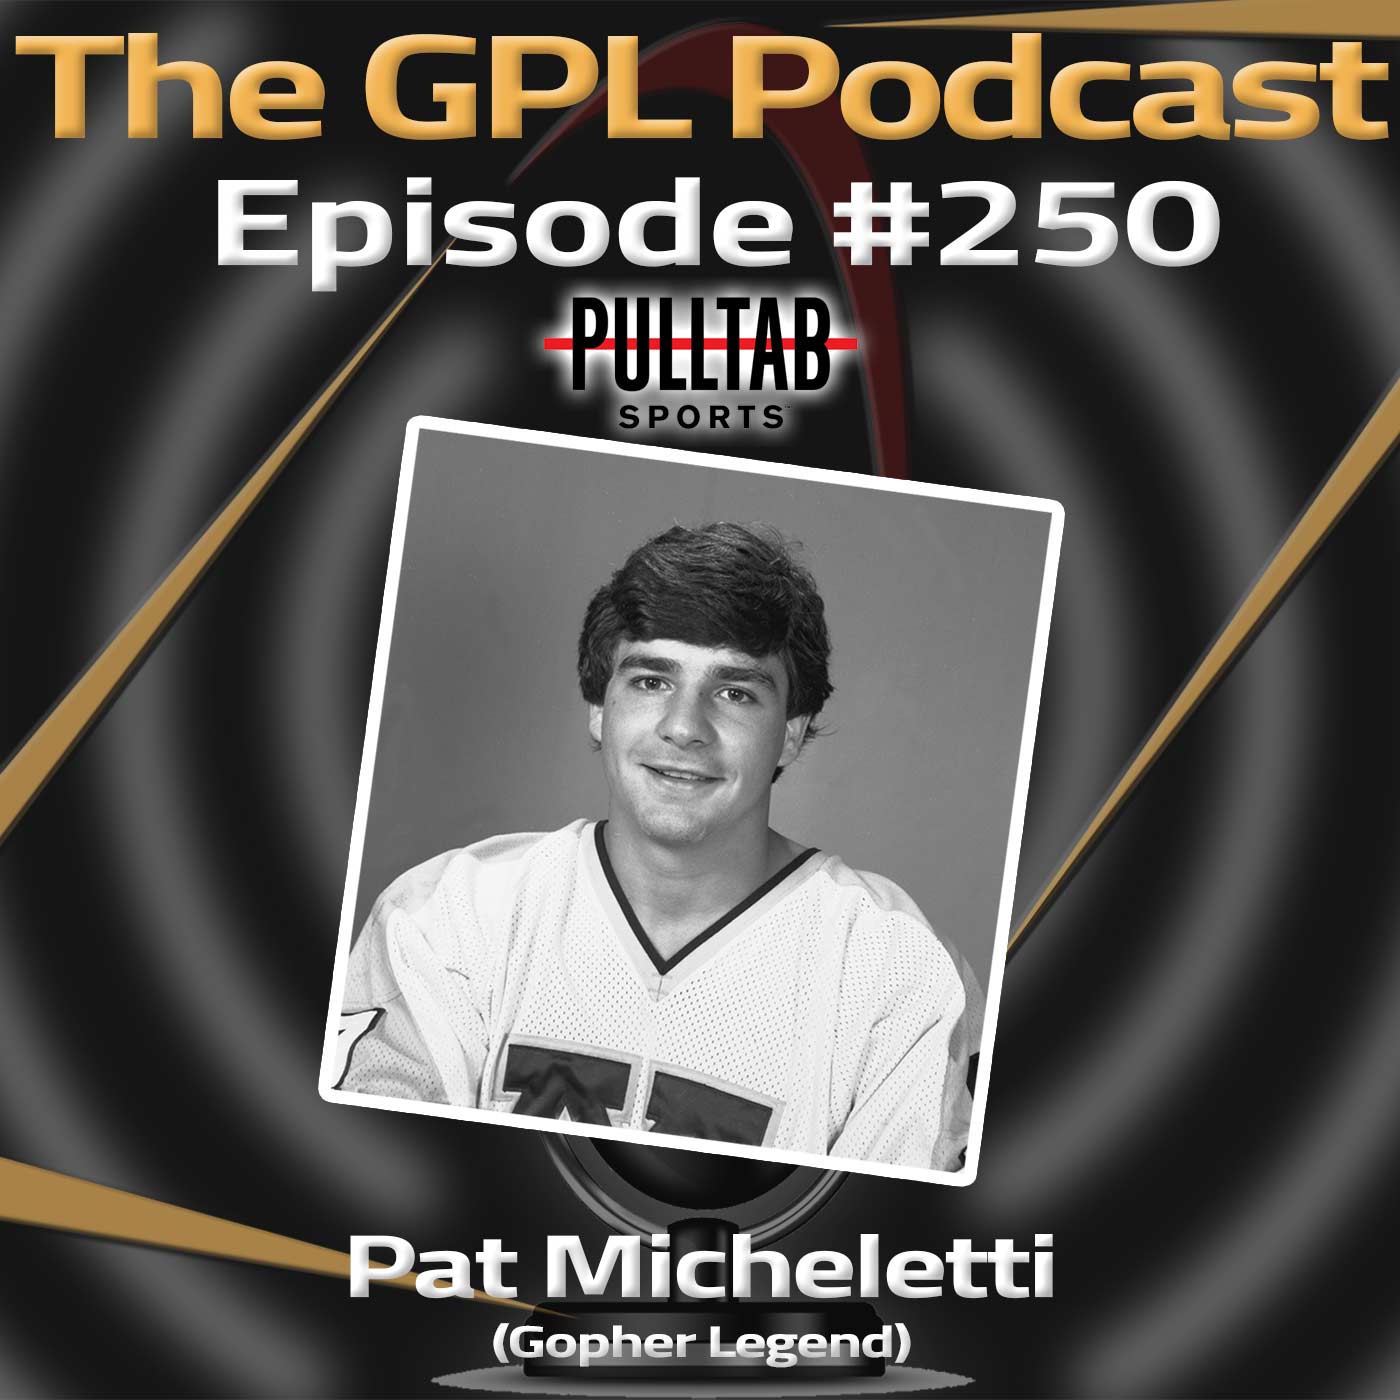 GPL Podcast #250: Pat Micheletti joins us for our 250th show